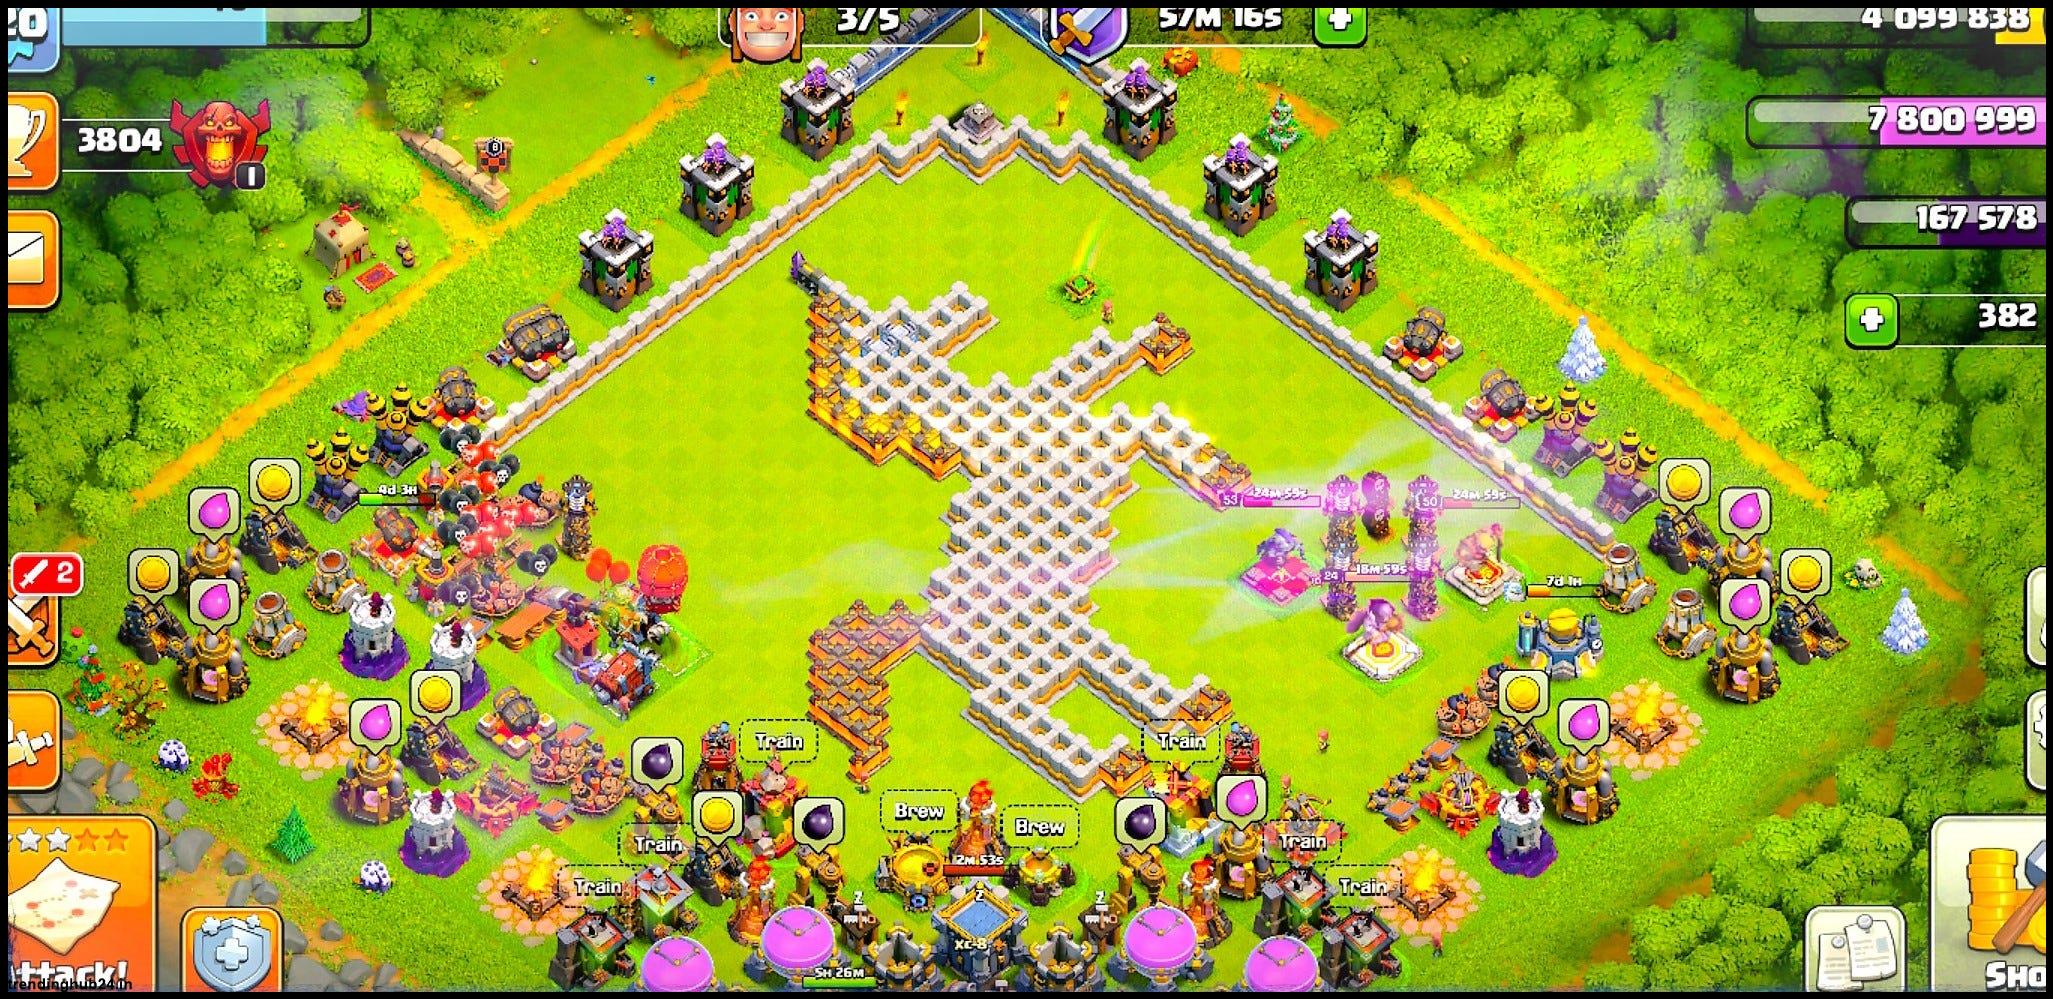 Information of Clash of Clans and details on how to install 2.jpg